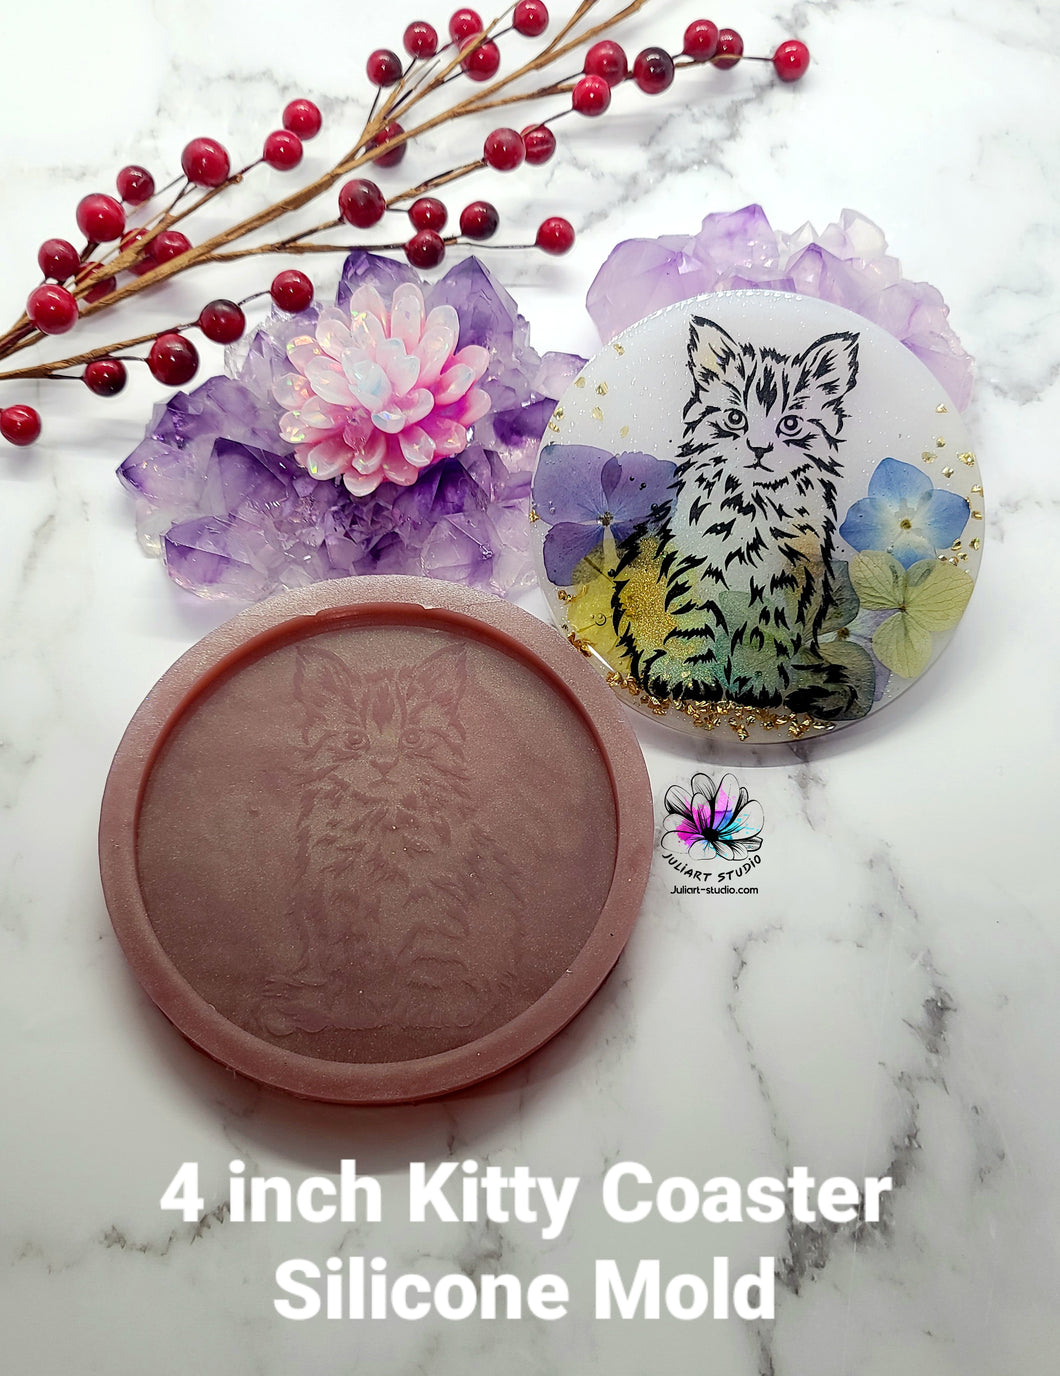 4 inch Kitty Coaster Silicone Mold for Resin casting